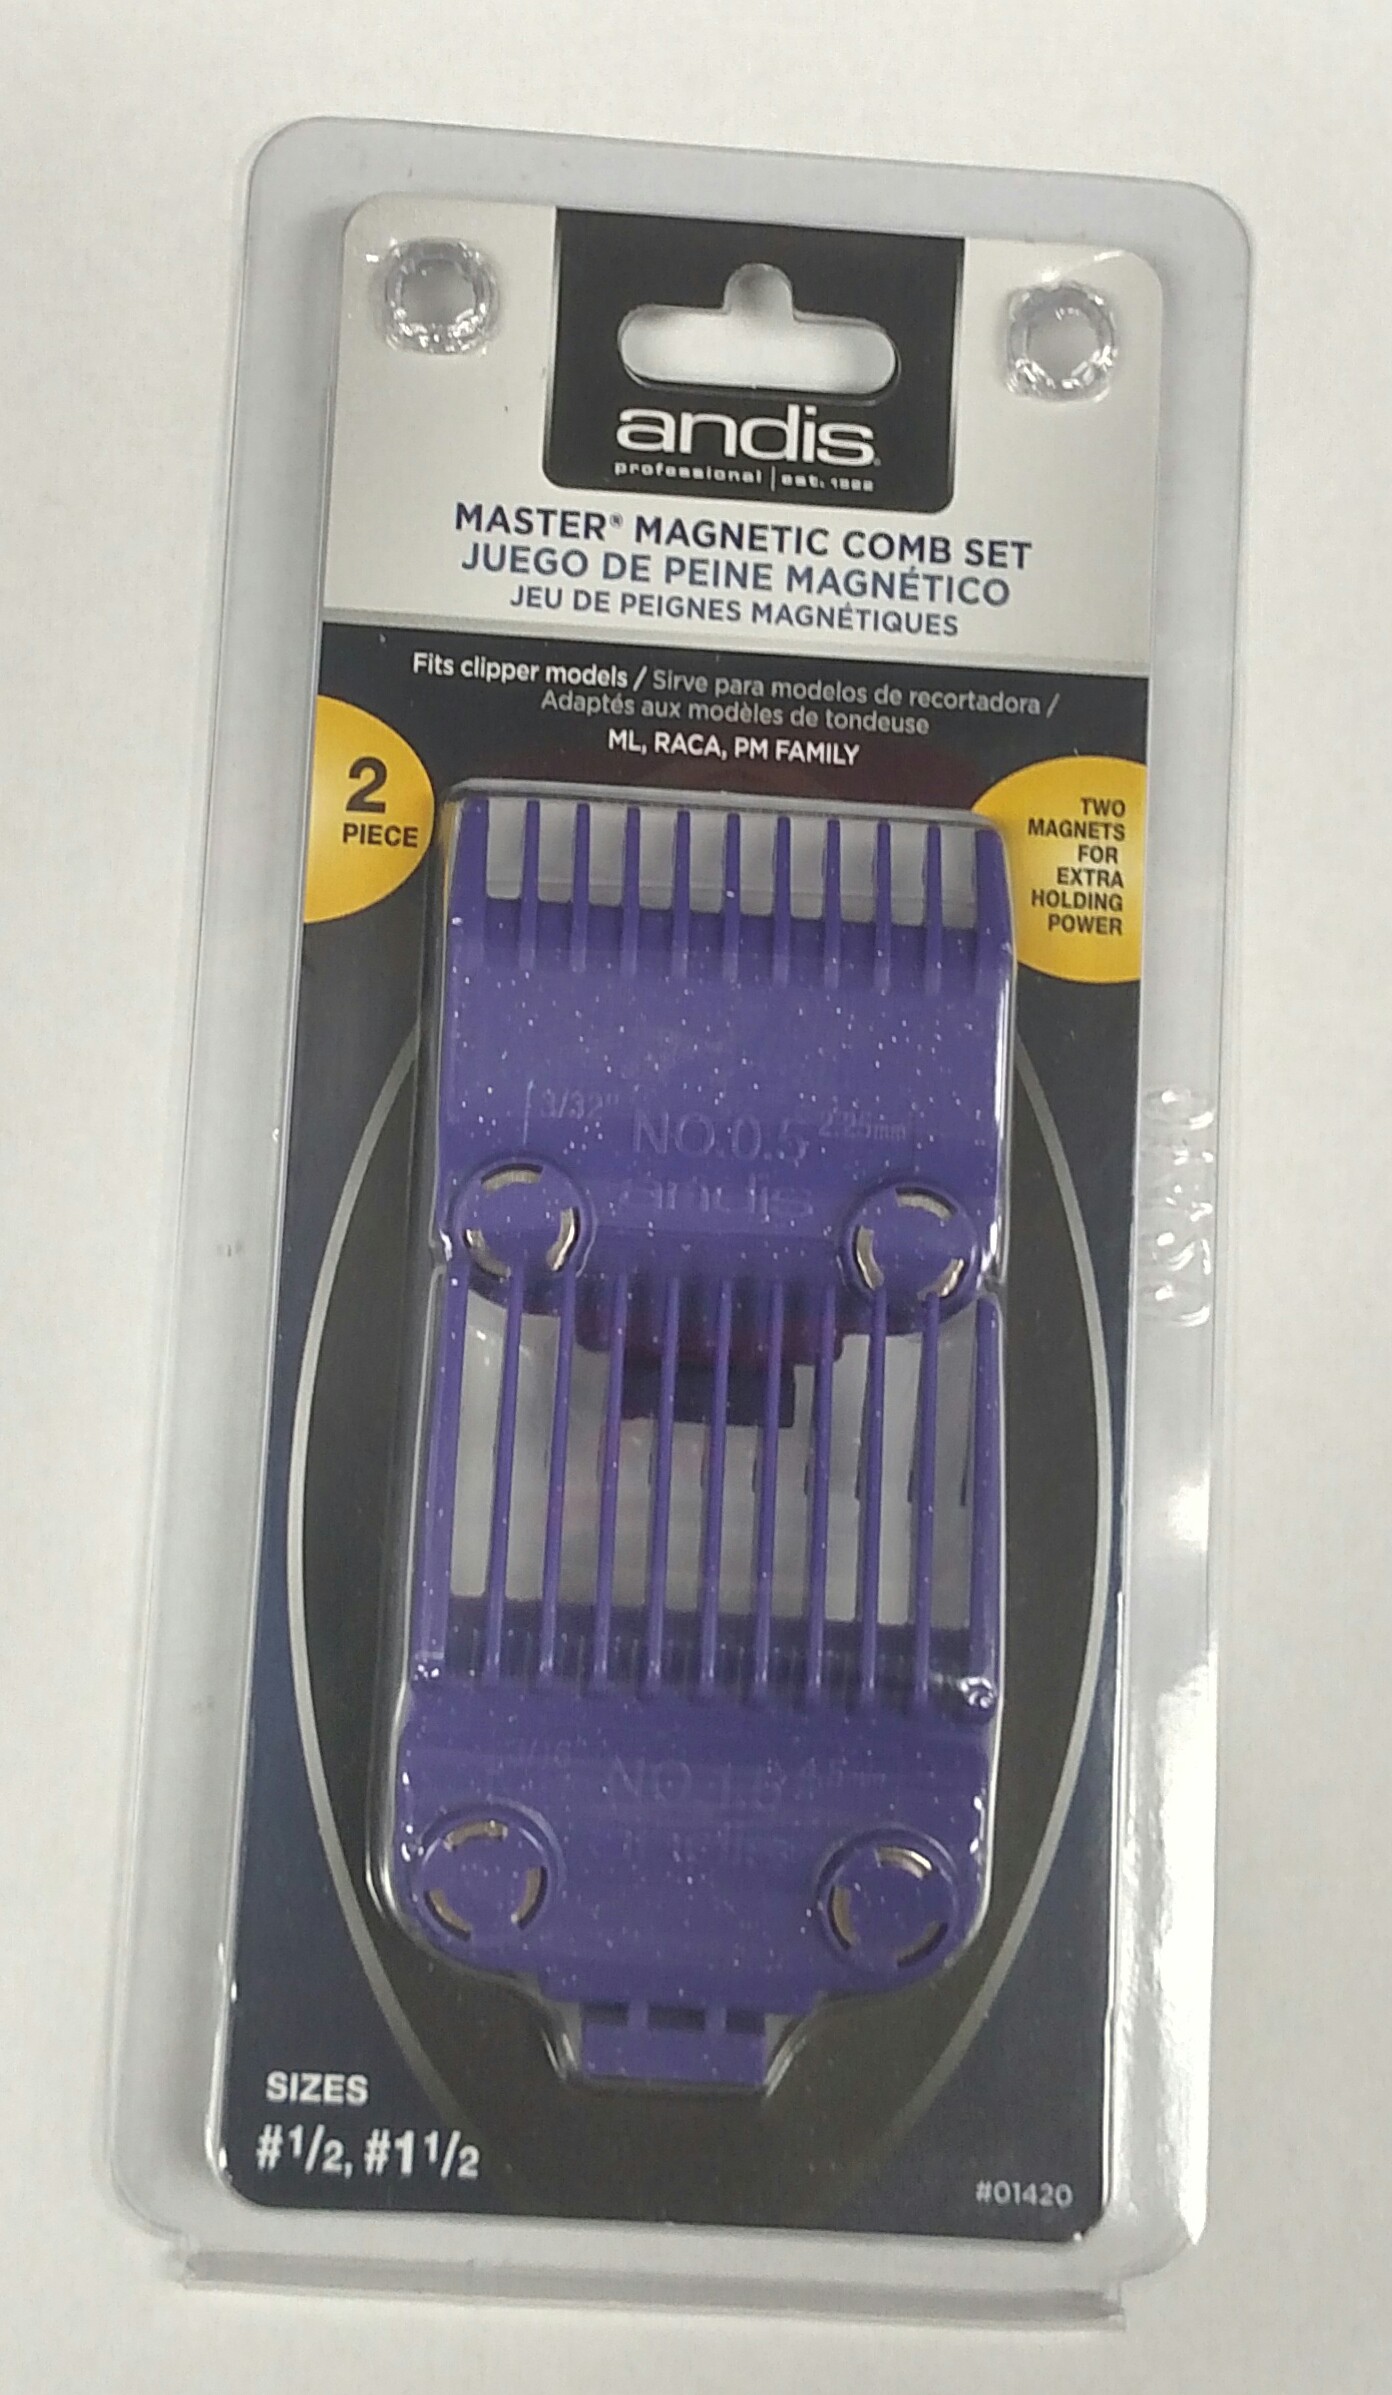 Andis Master Double Magnet Comb Set 1/2 and 1-1/2 7974